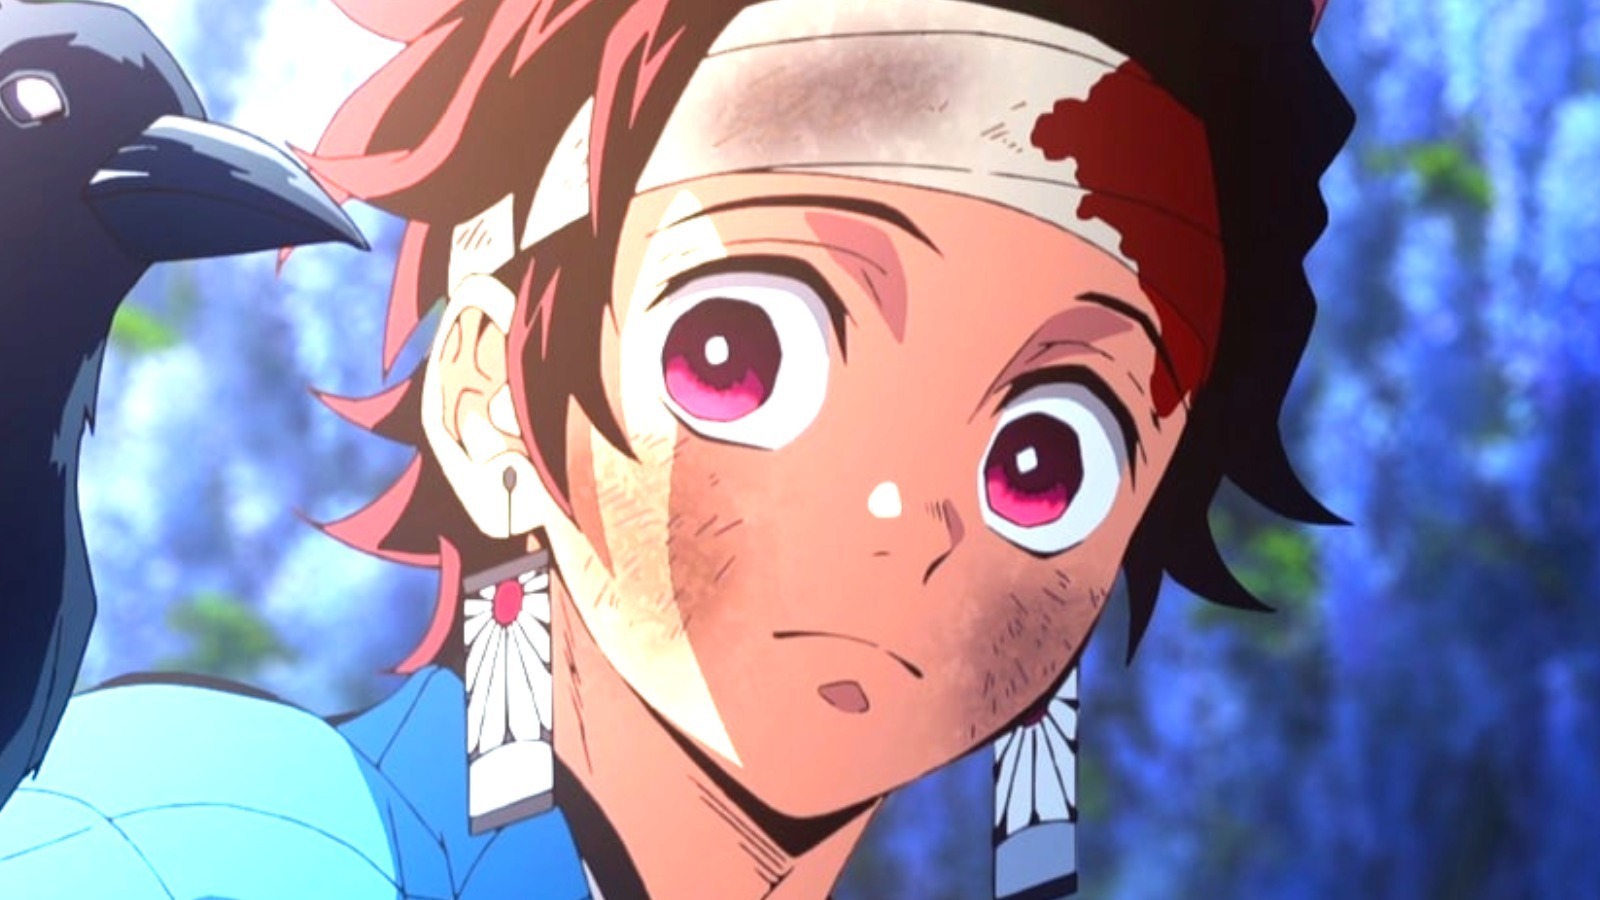 Why does Tanjiro have a Scar on his Head Where did he get it